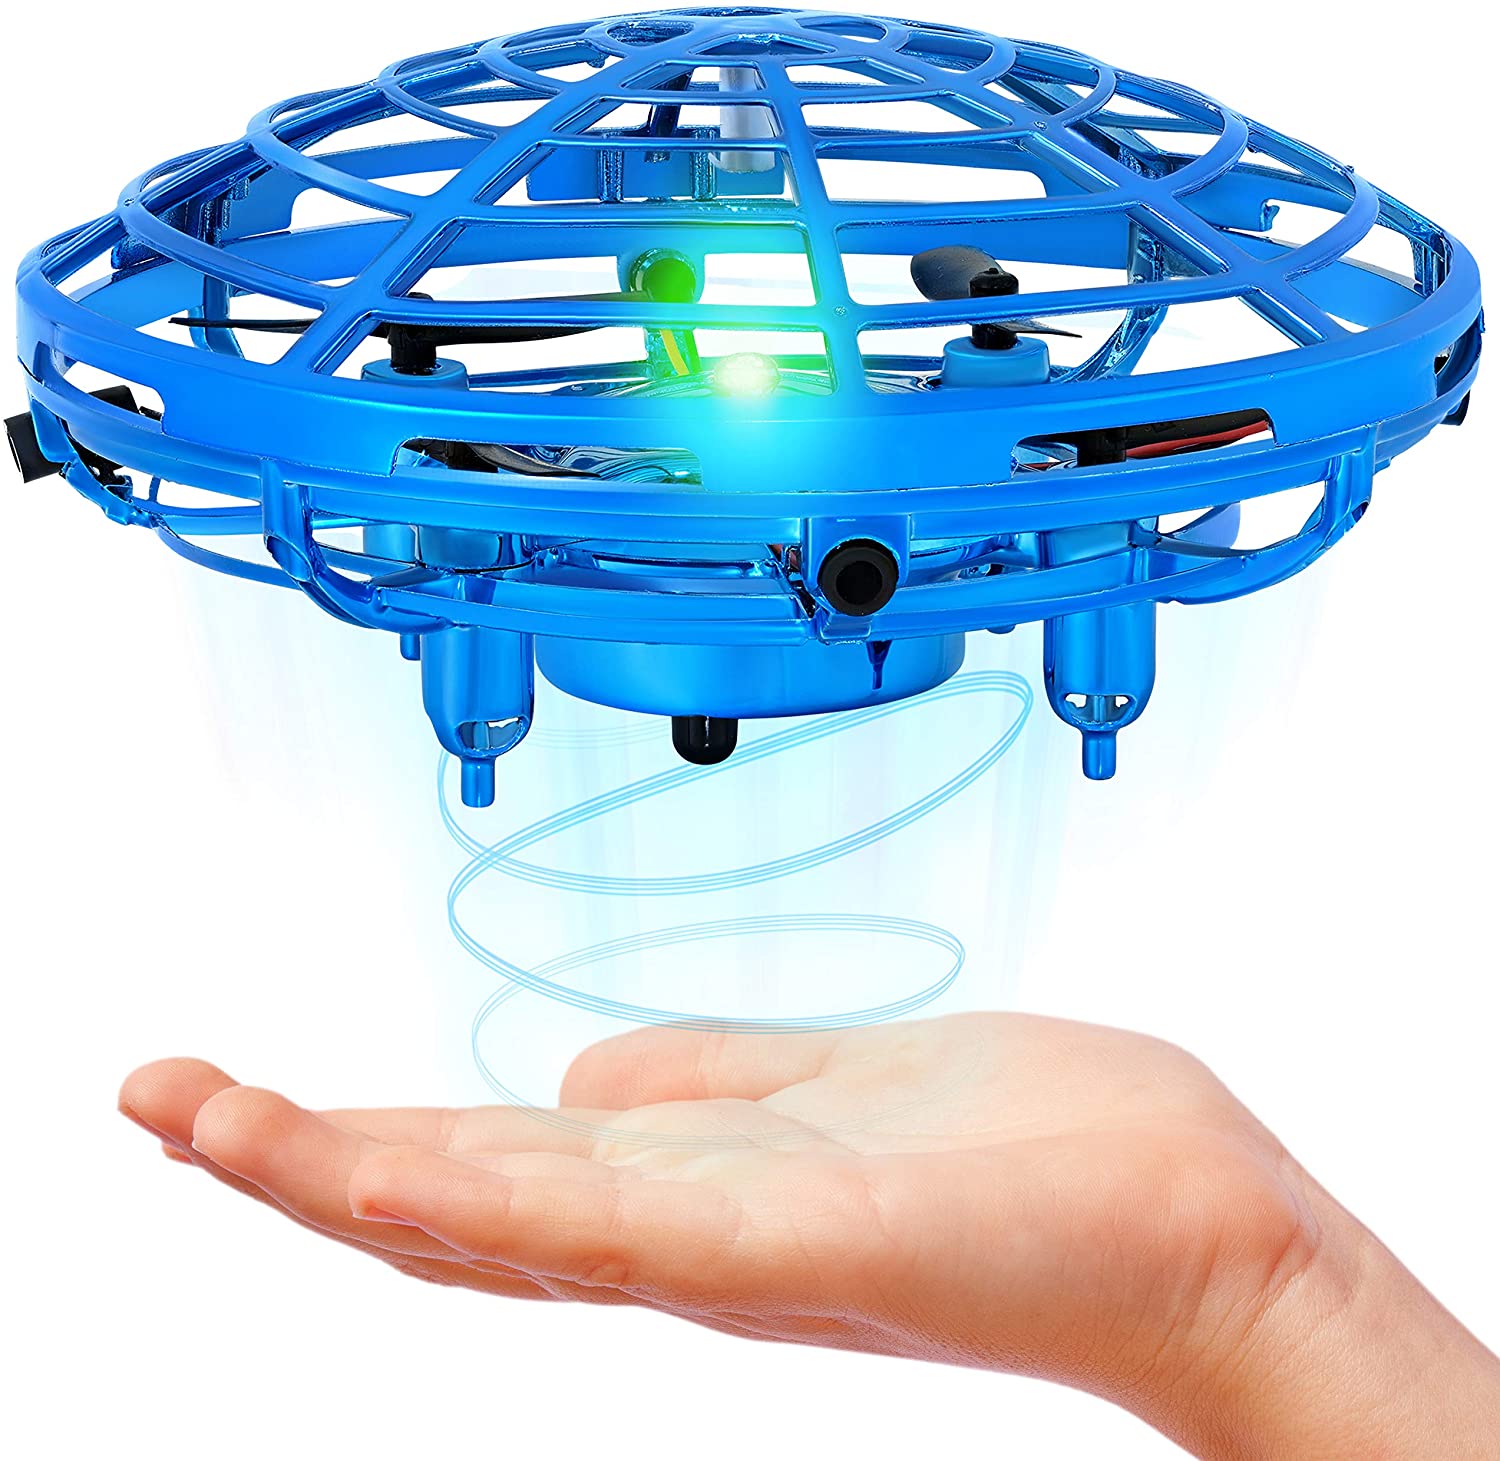 hand controlled ufo drone